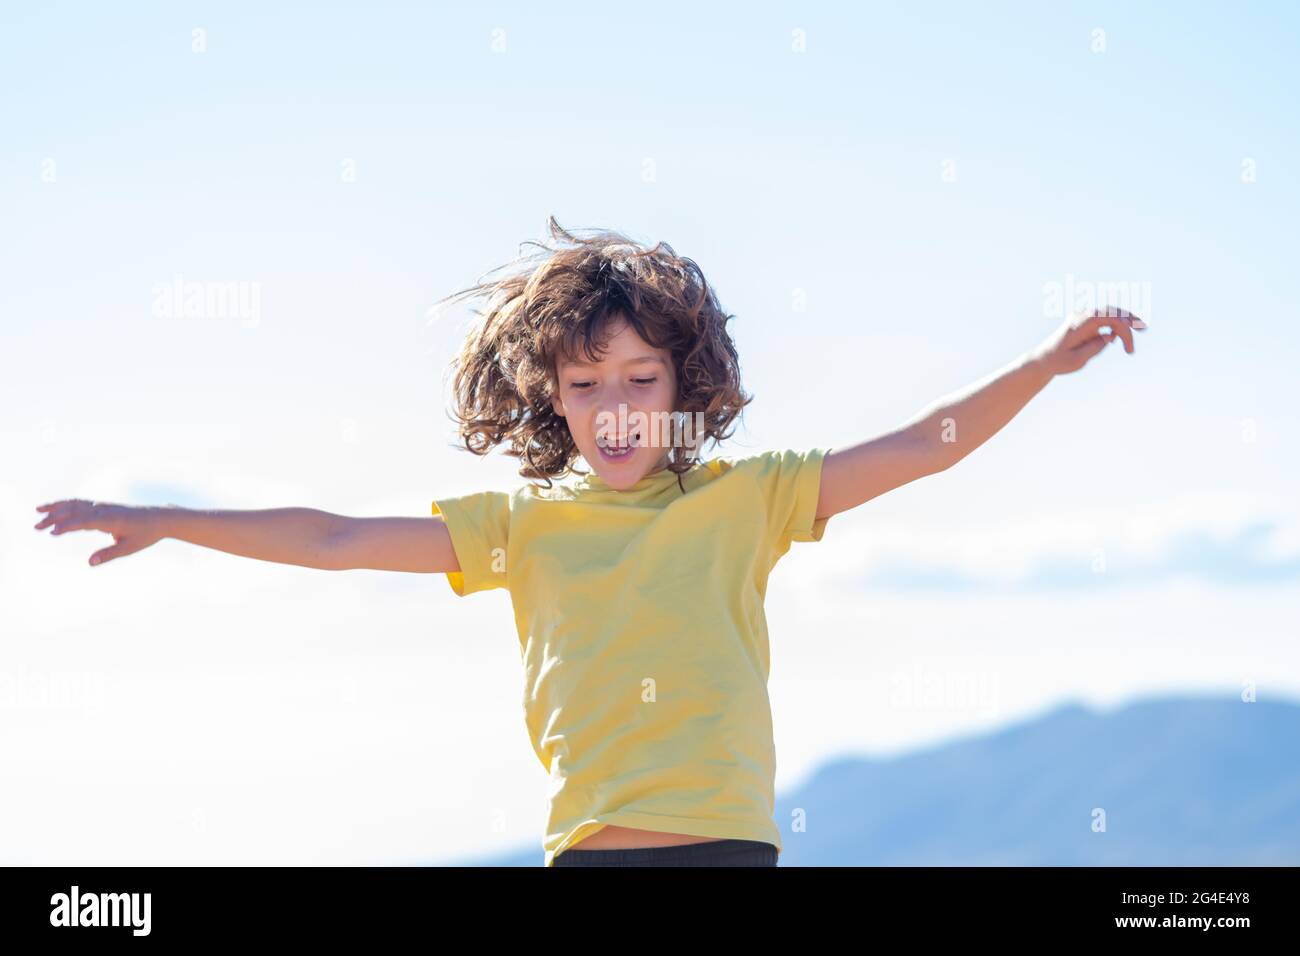 smiling boy with long hair jumps and has fun playing with open arms. blue sky background on a sunny day Stock Photo